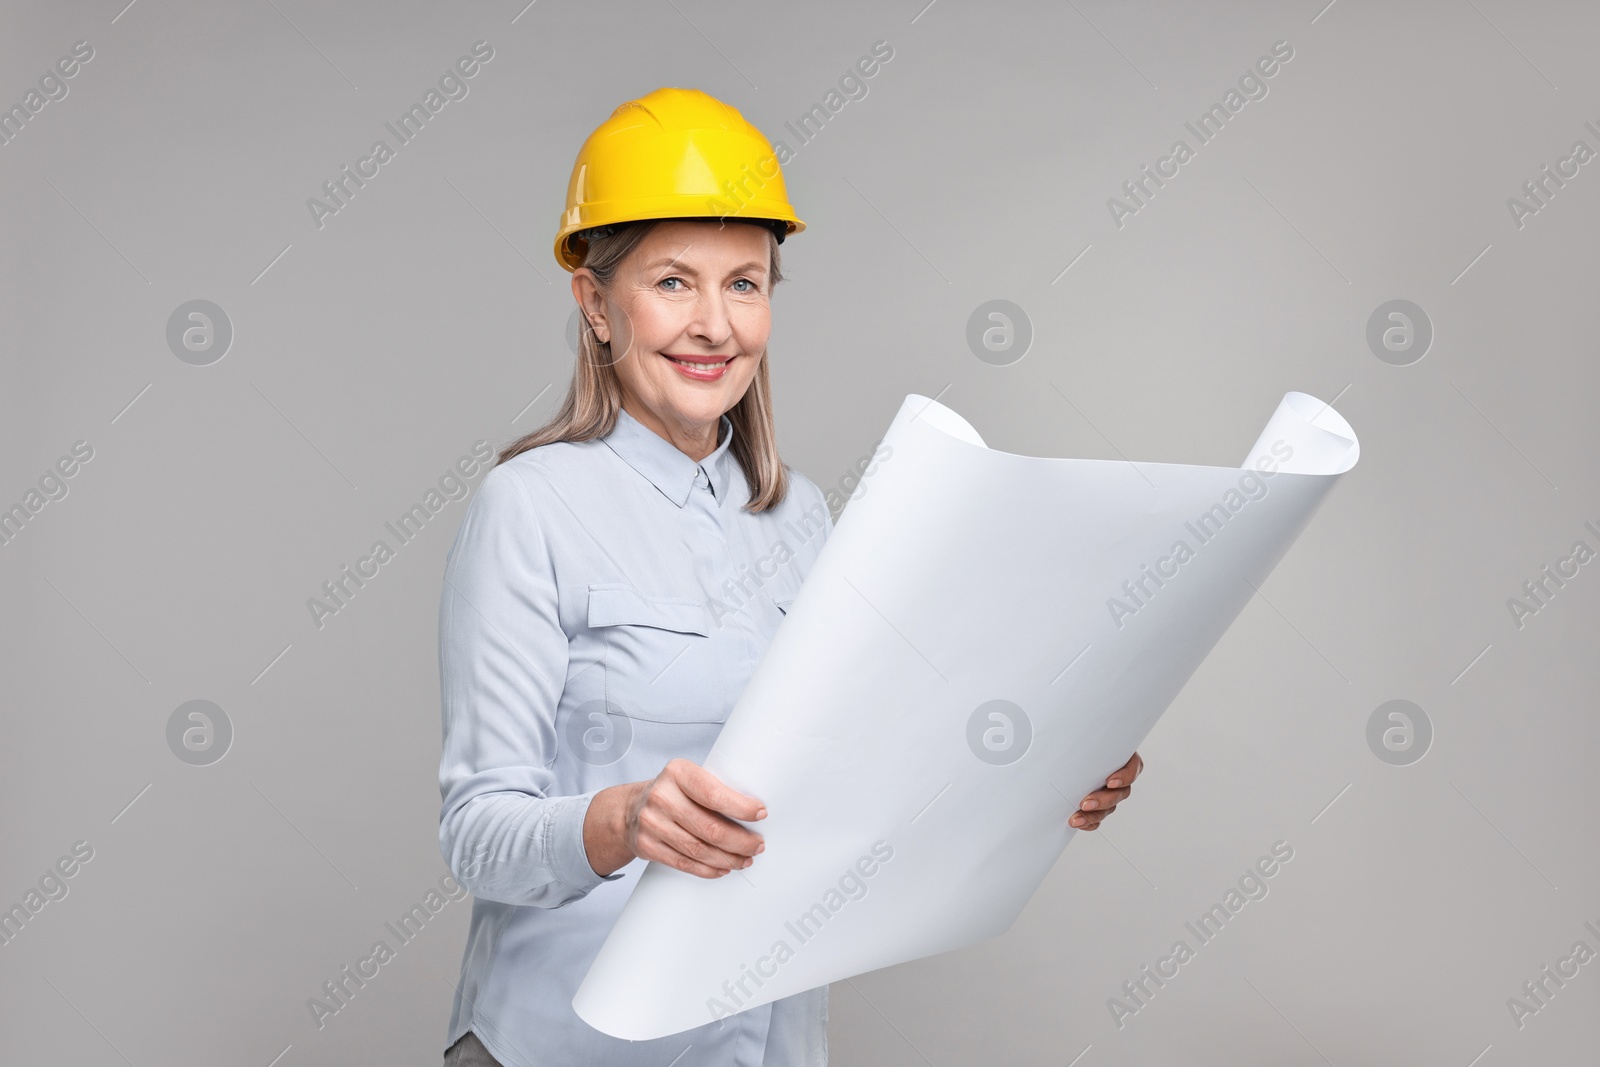 Photo of Architect in hard hat with draft on grey background